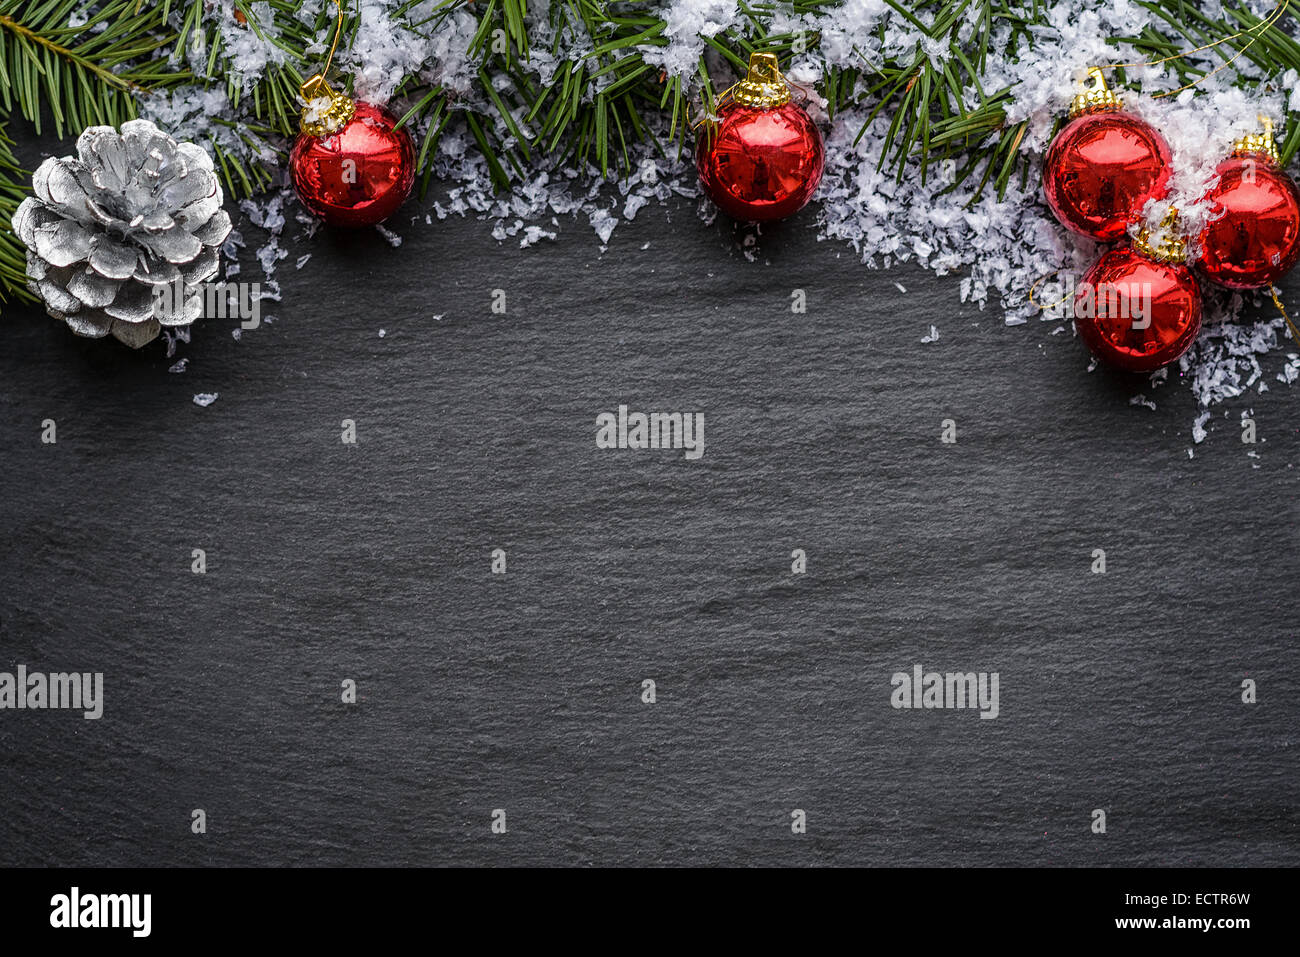 Christmas background with colorful red baubles, a silver decorative pine cone and green pine branches over a textured grey backg Stock Photo